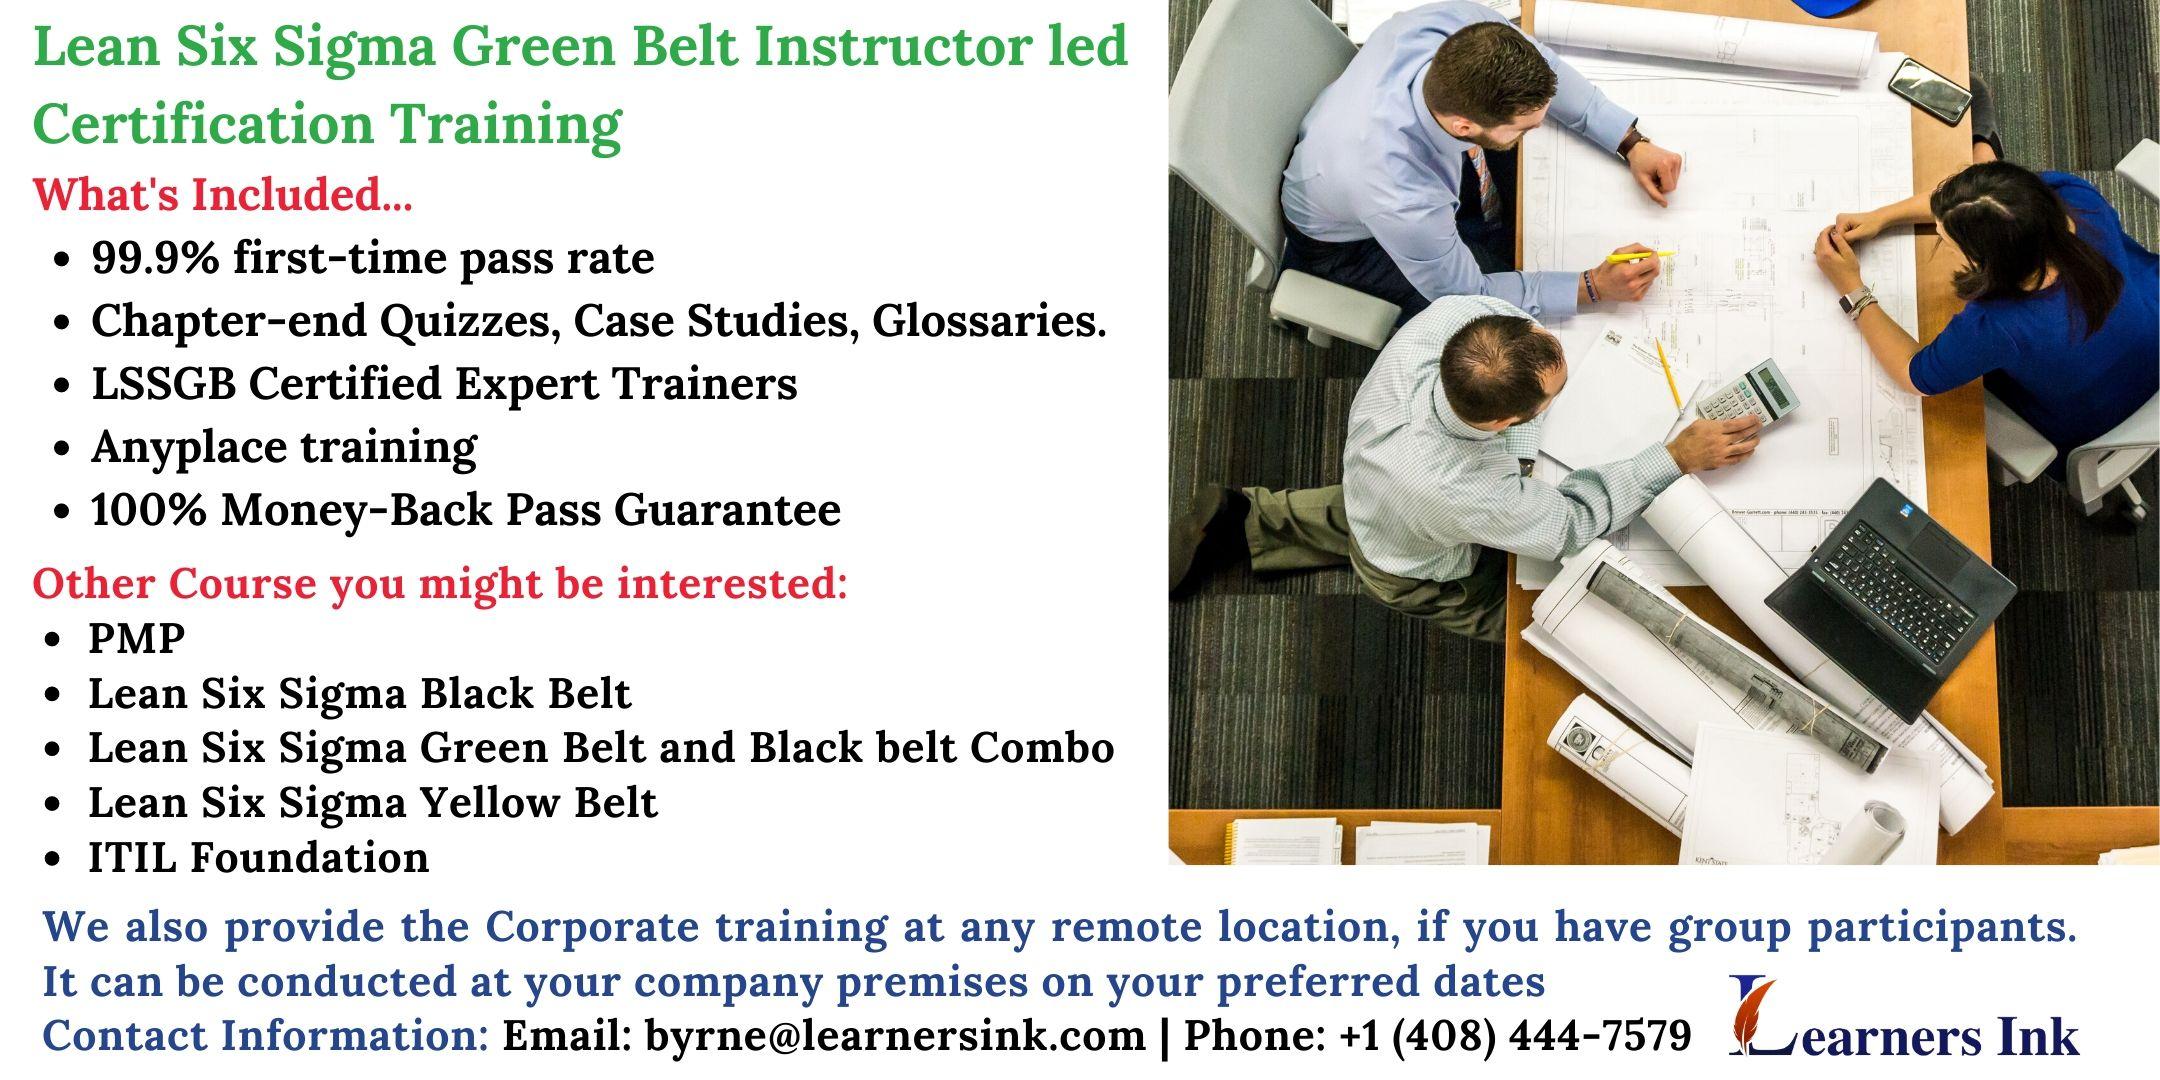 Lean Six Sigma Green Belt Certification Training Course (LSSGB) in Sandy Springs